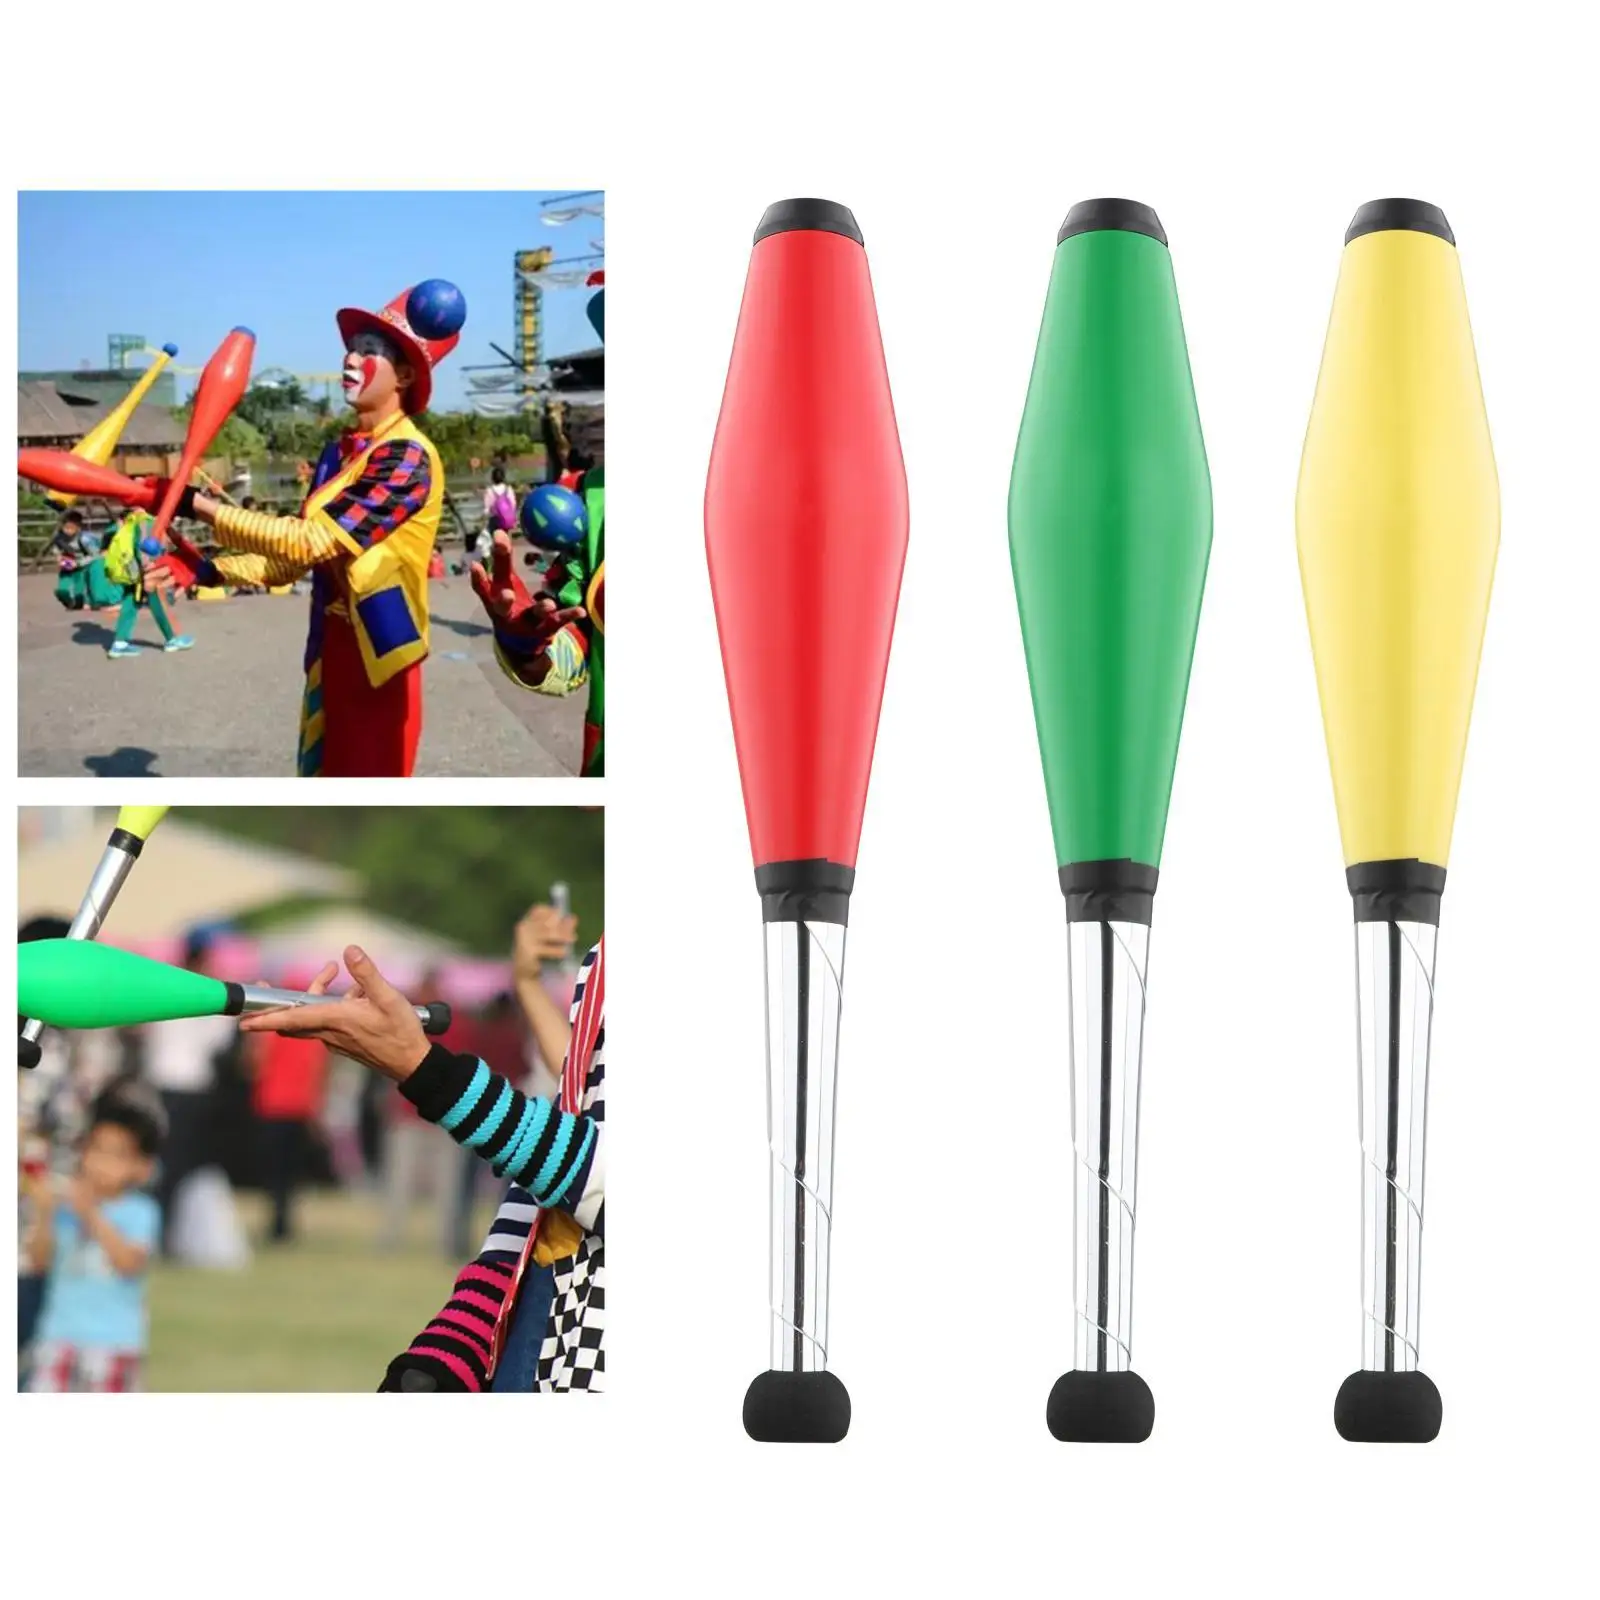 Pro Juggling Clubs Sticks Pins for Playing Toy Training School Exercise Act